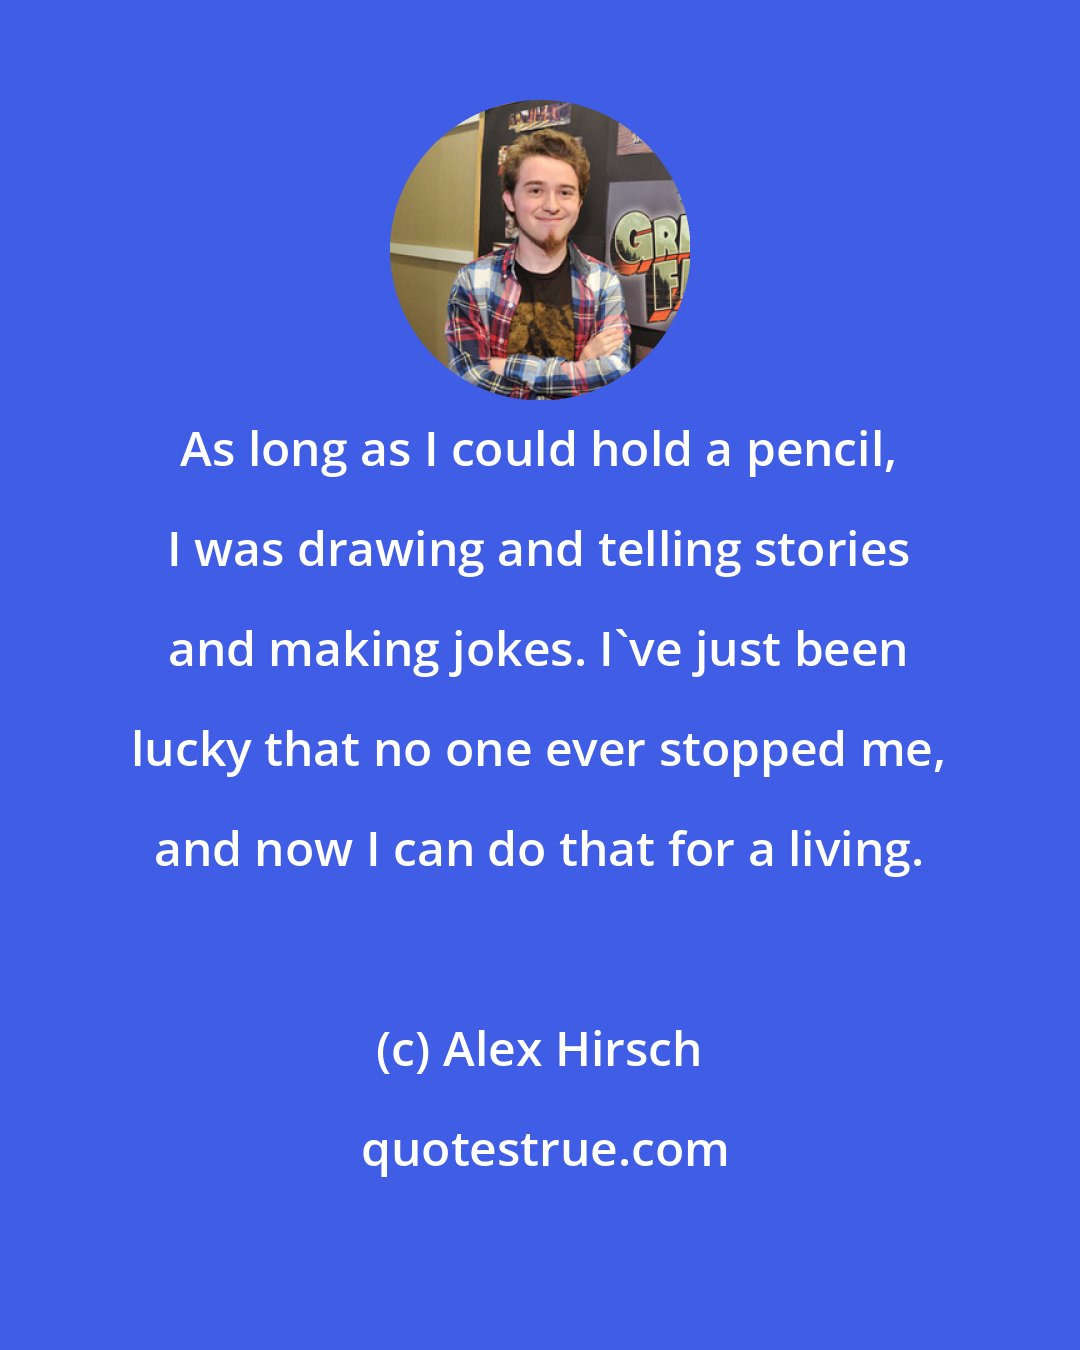 Alex Hirsch: As long as I could hold a pencil, I was drawing and telling stories and making jokes. I've just been lucky that no one ever stopped me, and now I can do that for a living.